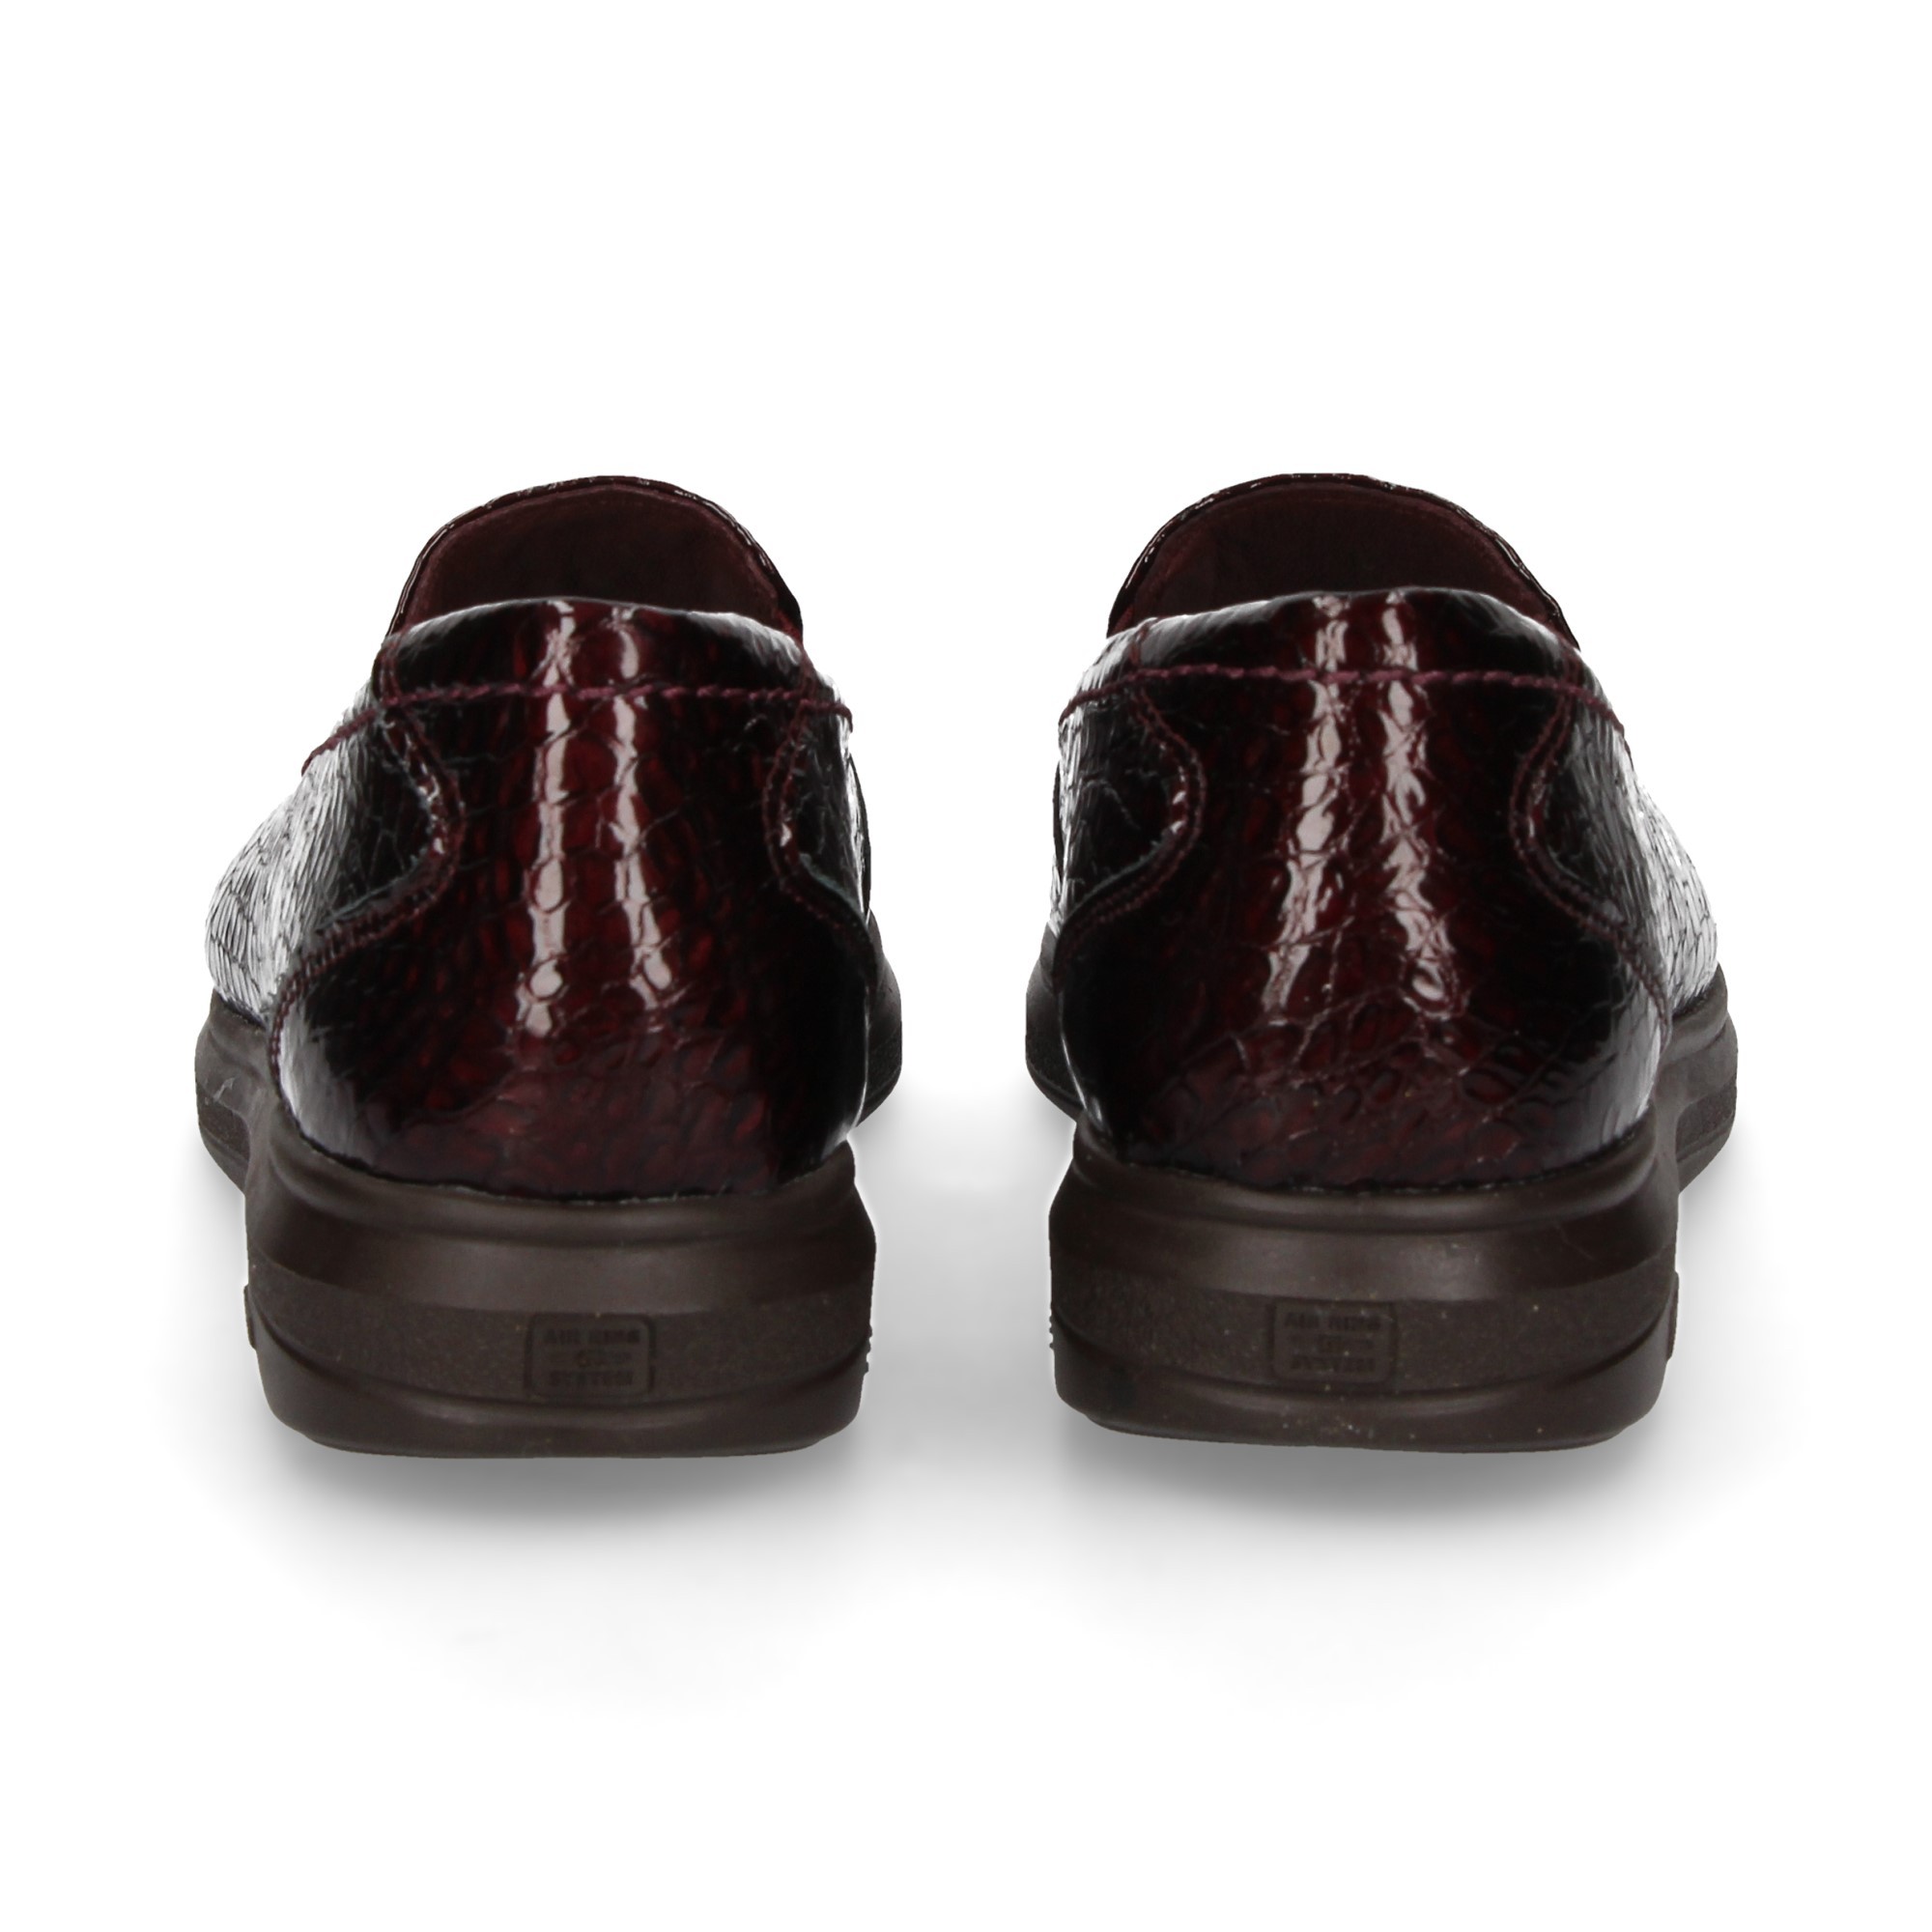 moccasin-elast-sides-patent-leather-coco-burgundy